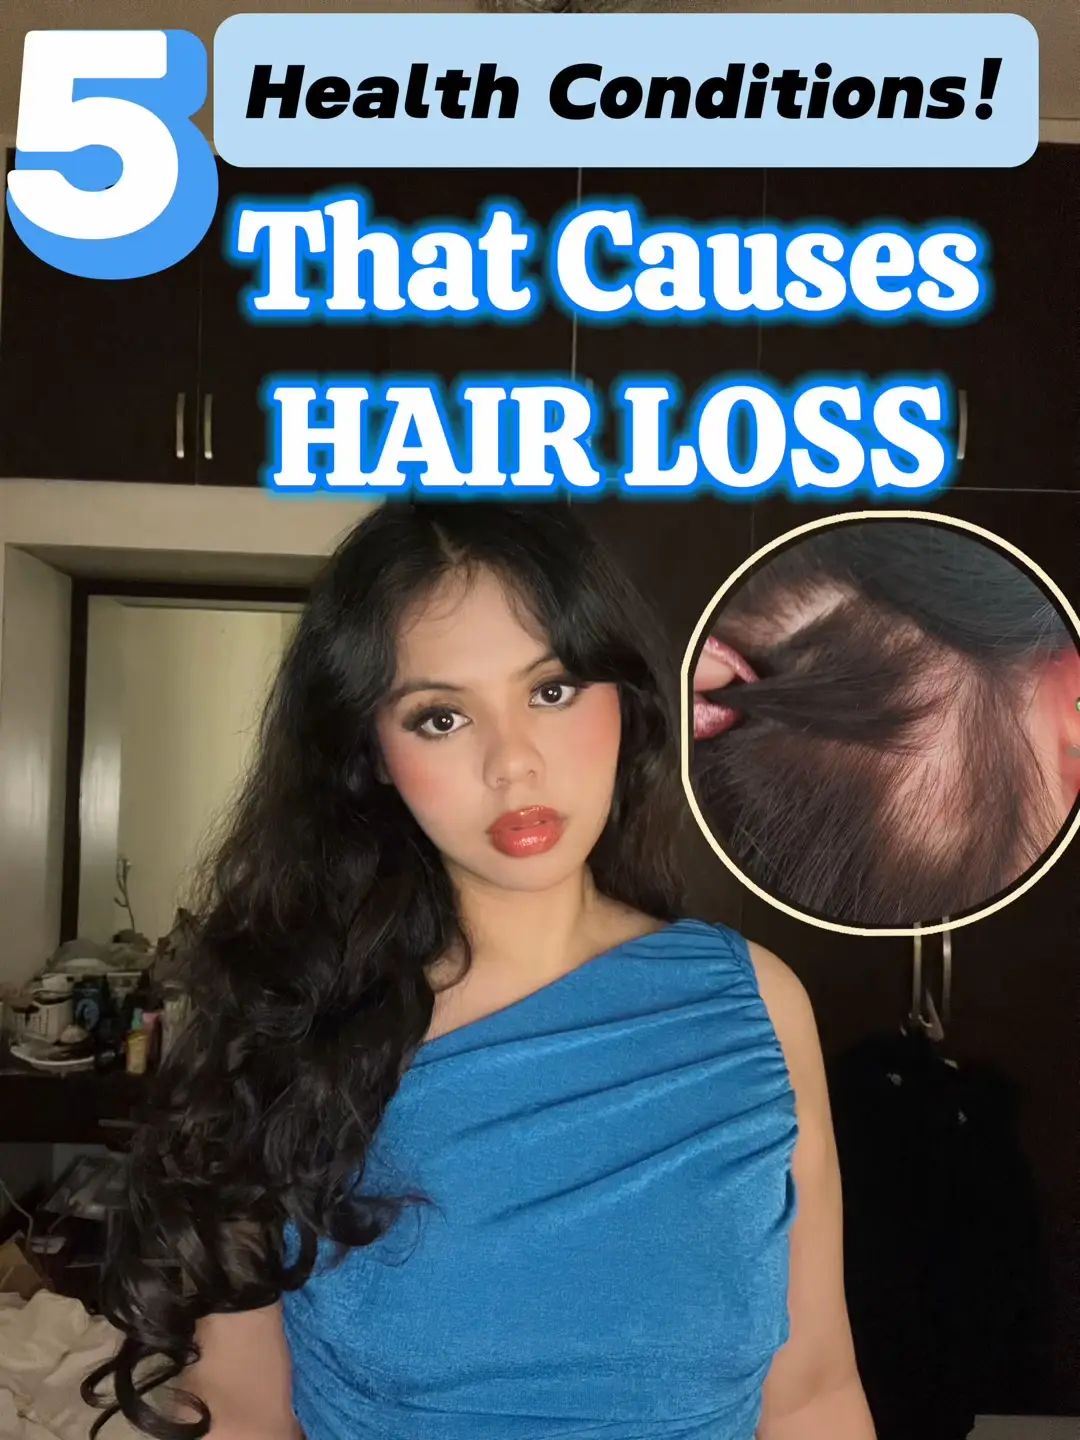 5 Health Conditions That Causes Hair Loss/Fall